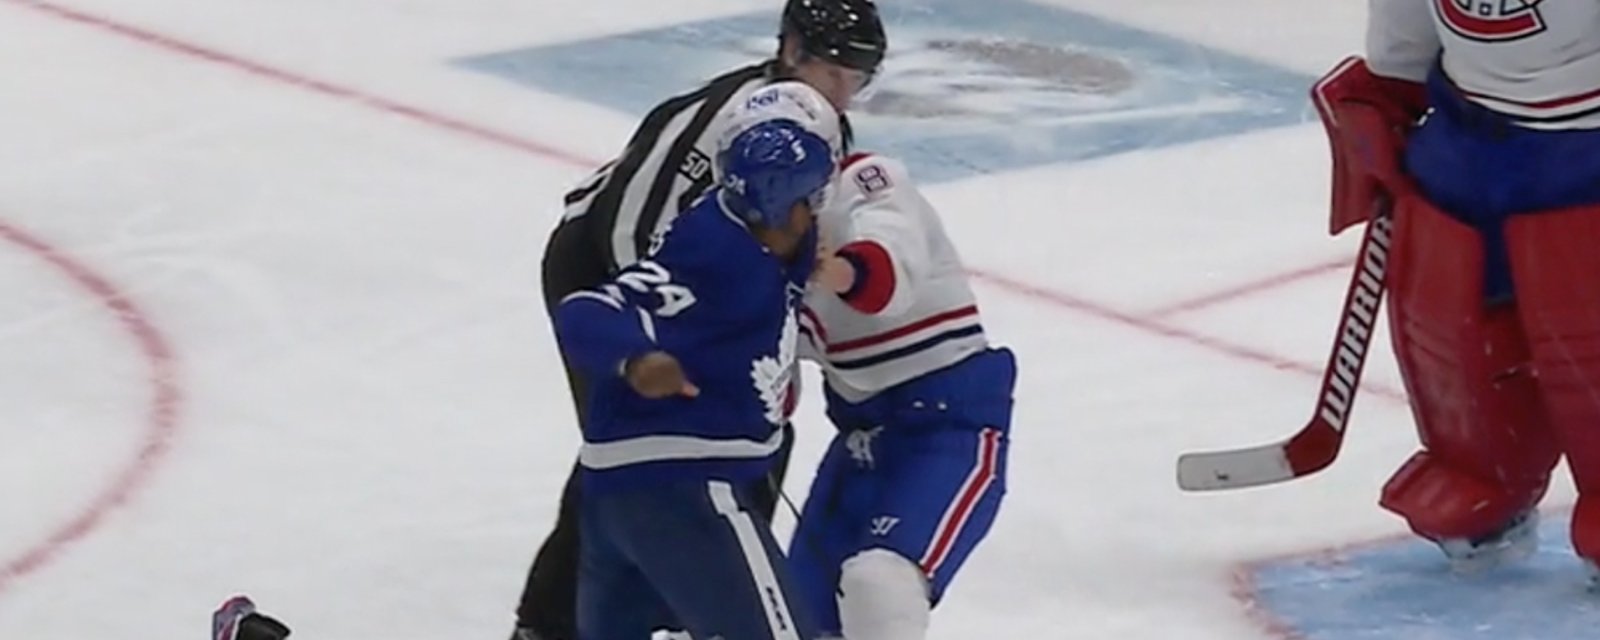 Simmonds drops Chiarot in his first scrap with the Leafs